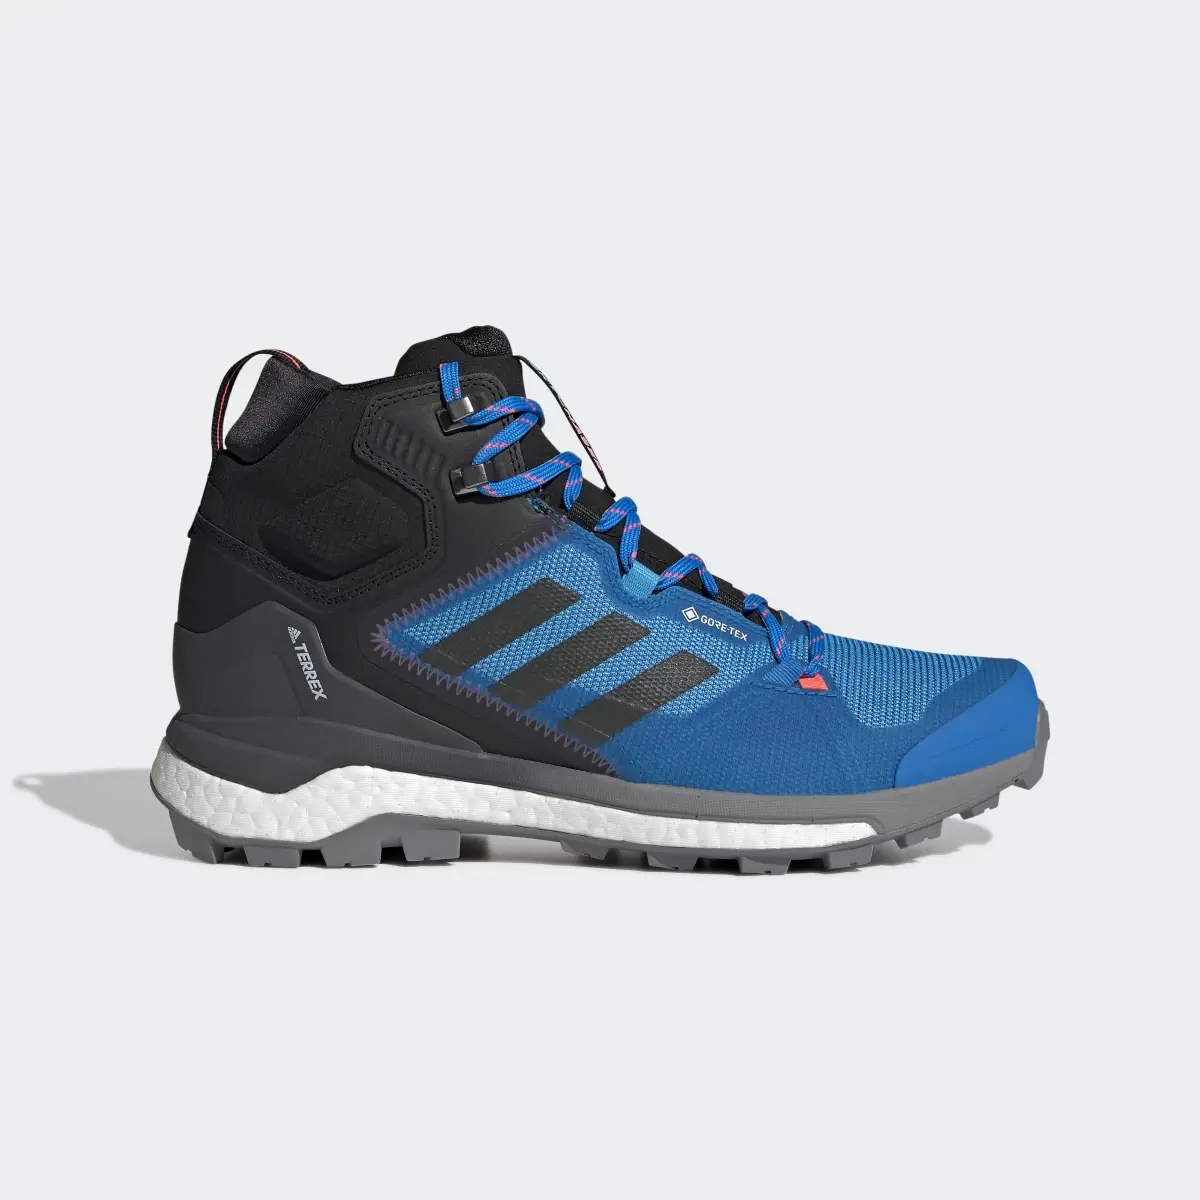 Adidas TERREX Skychaser 2 Mid GORE-TEX Hiking Shoes. 2